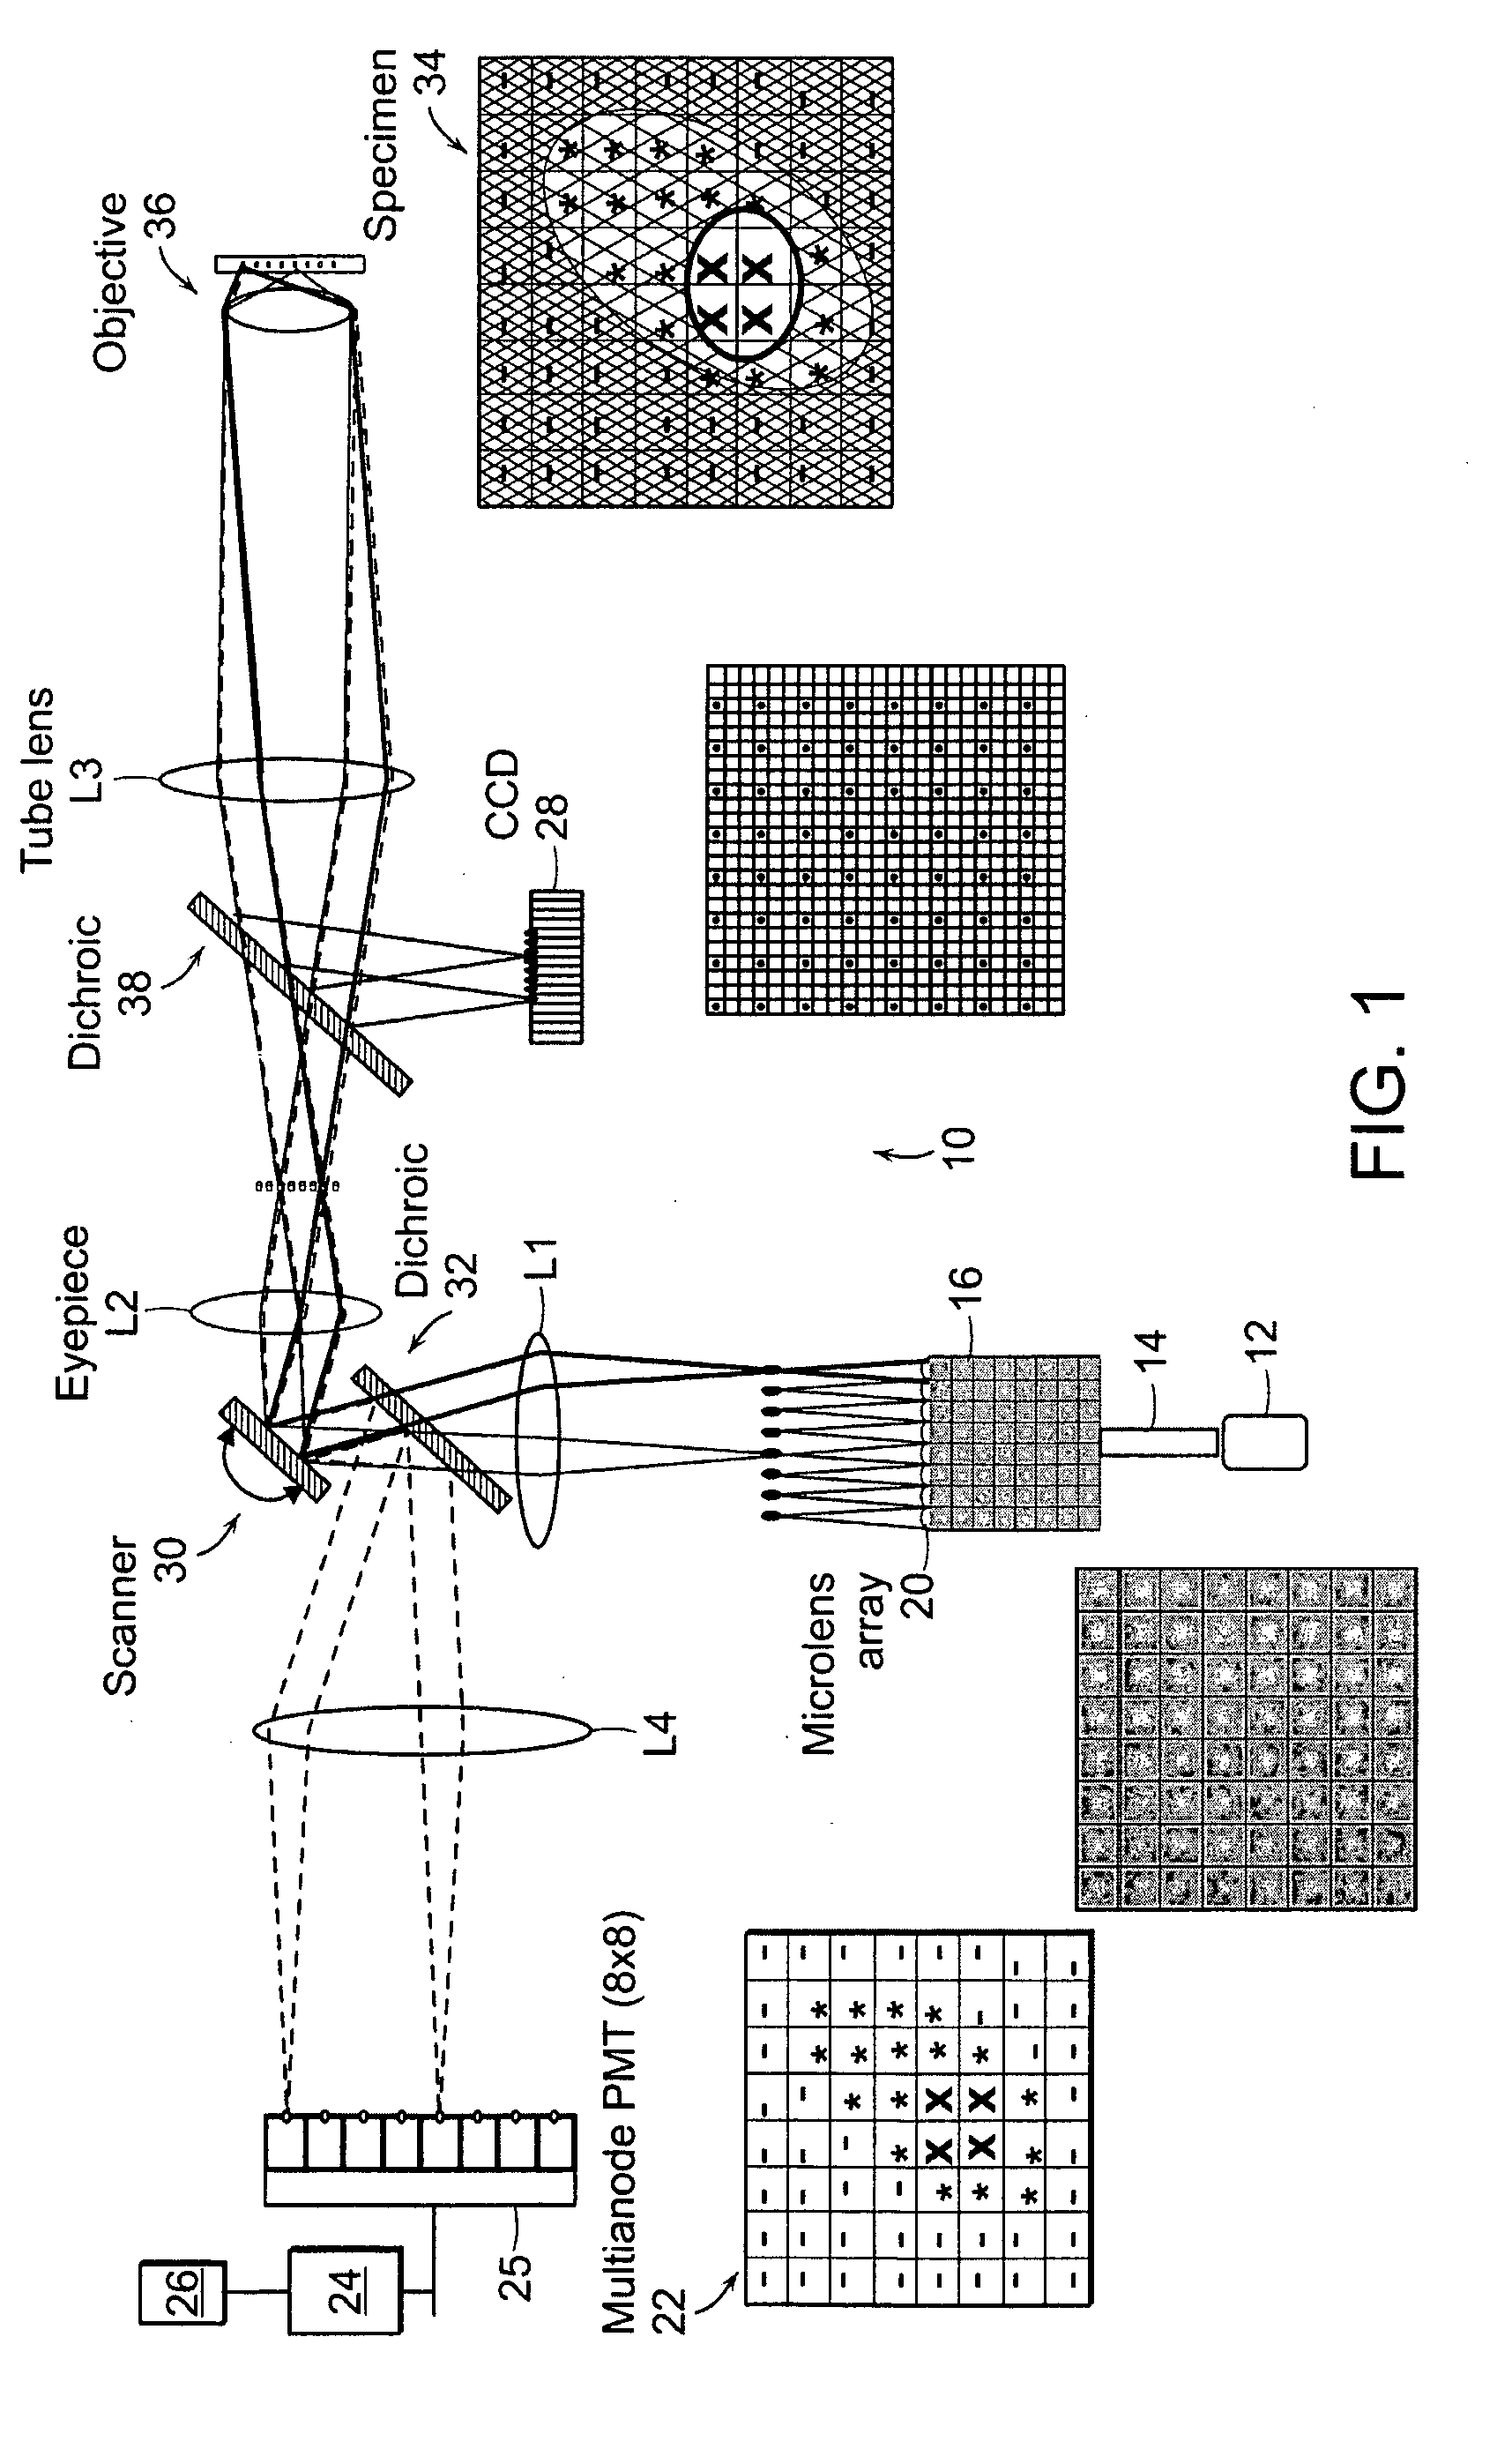 Multifocal imaging systems and method